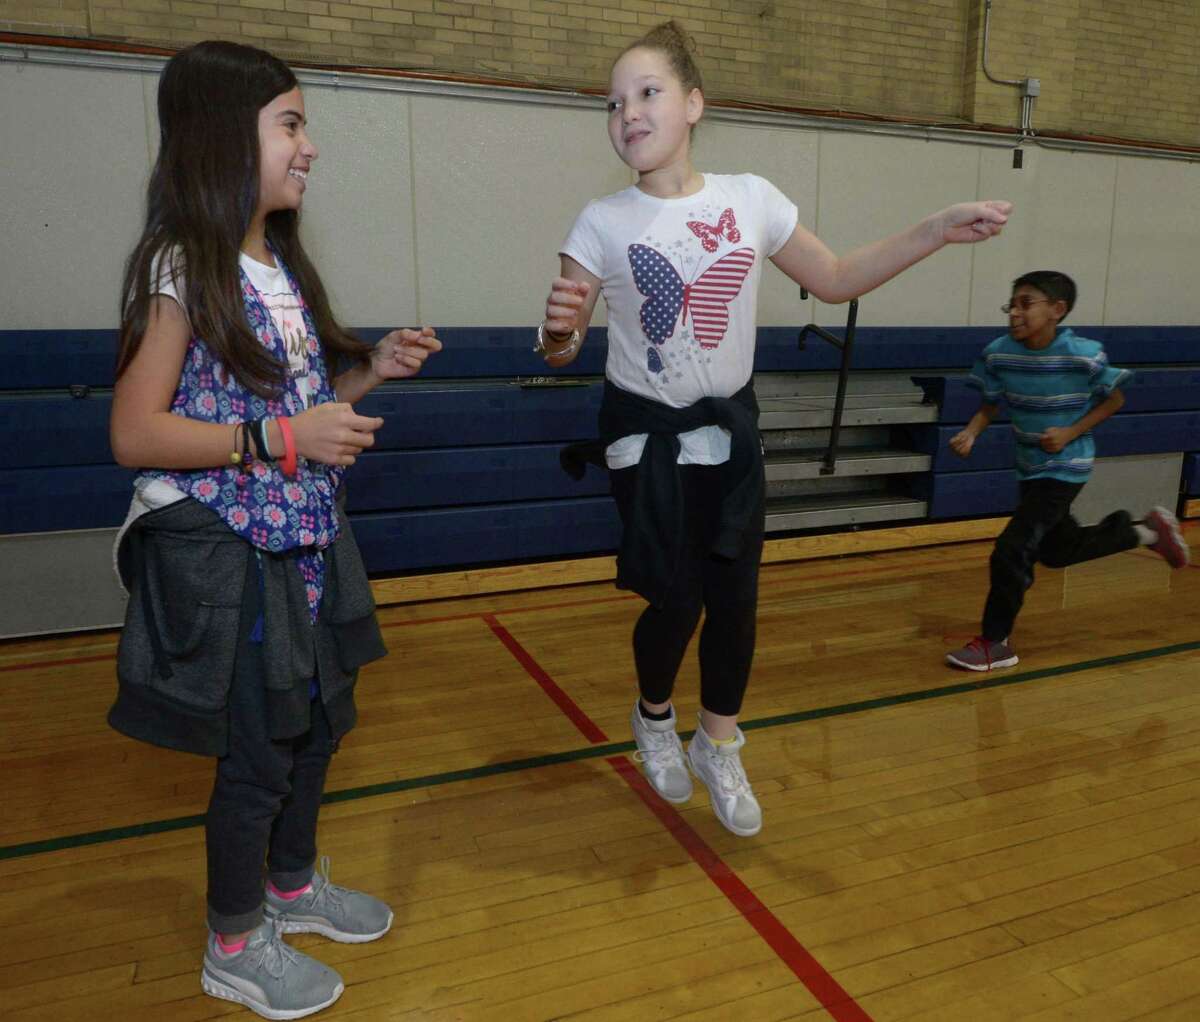 Nathan Hale Middle School students participate in warm-up exercises during a physical education class at the school in Norwalk, Conn. October 26, 2017.